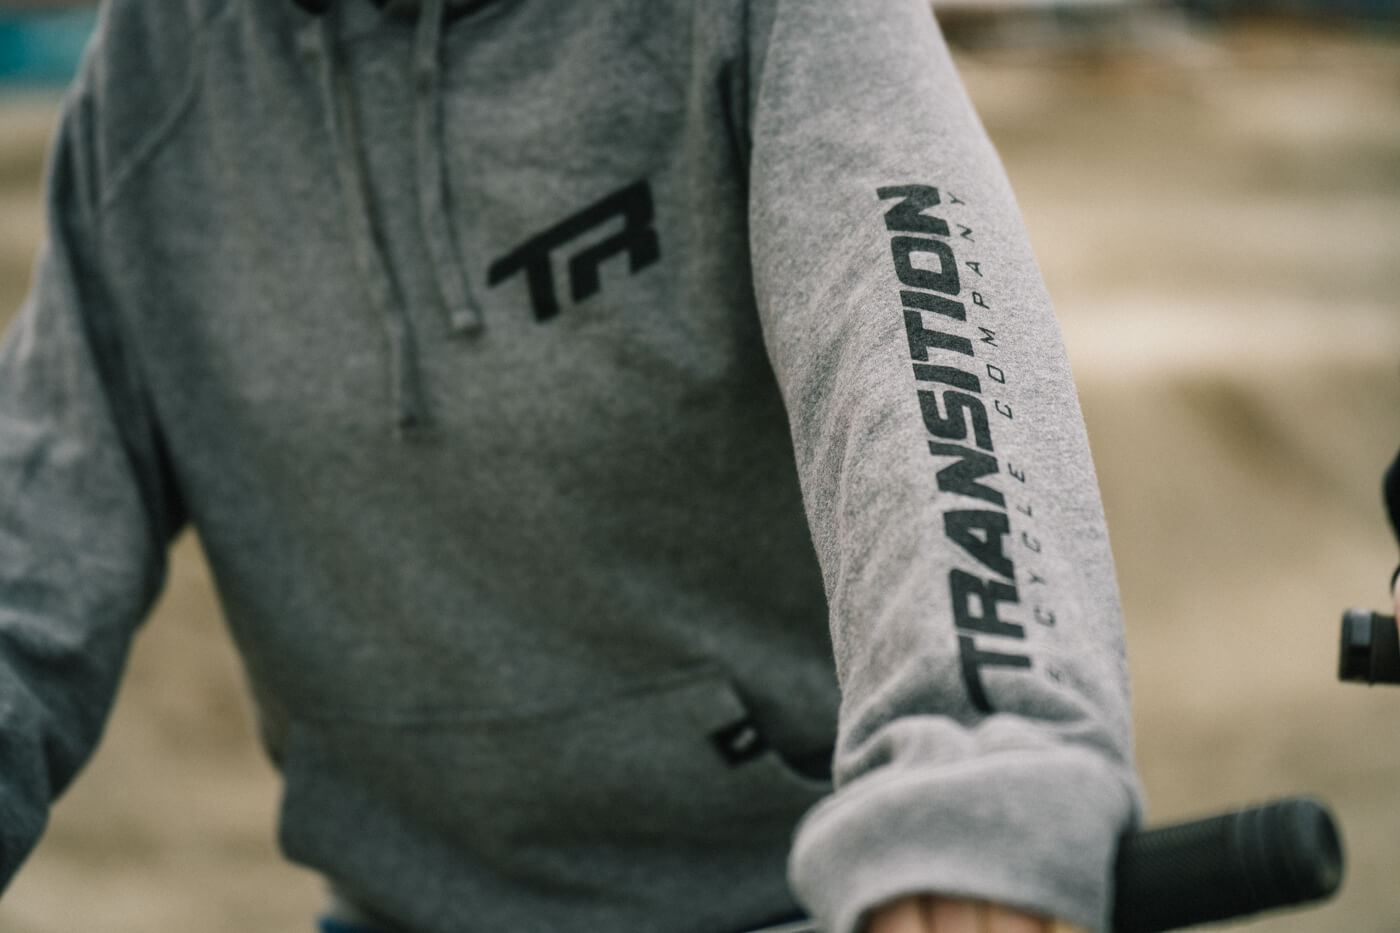 Transition Classic Pullover Hoodie Heather Grey